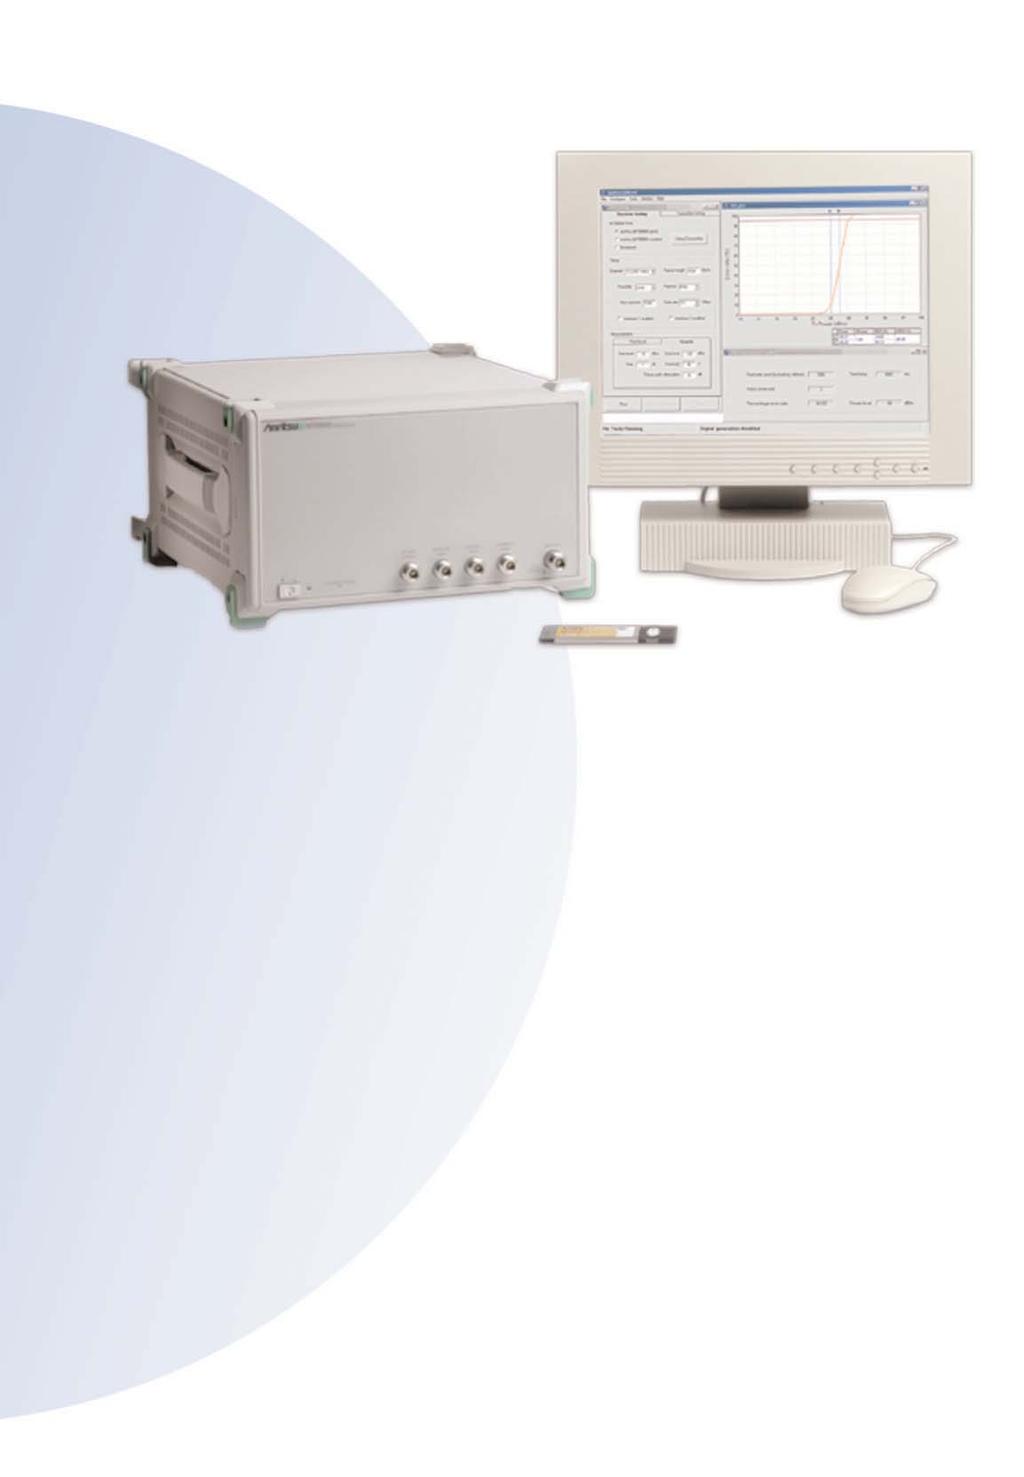 The new Anritsu MT8860A WLAN Test Set is dedicated to testing WLAN devices conforming to the IEEE 802.11 standards.